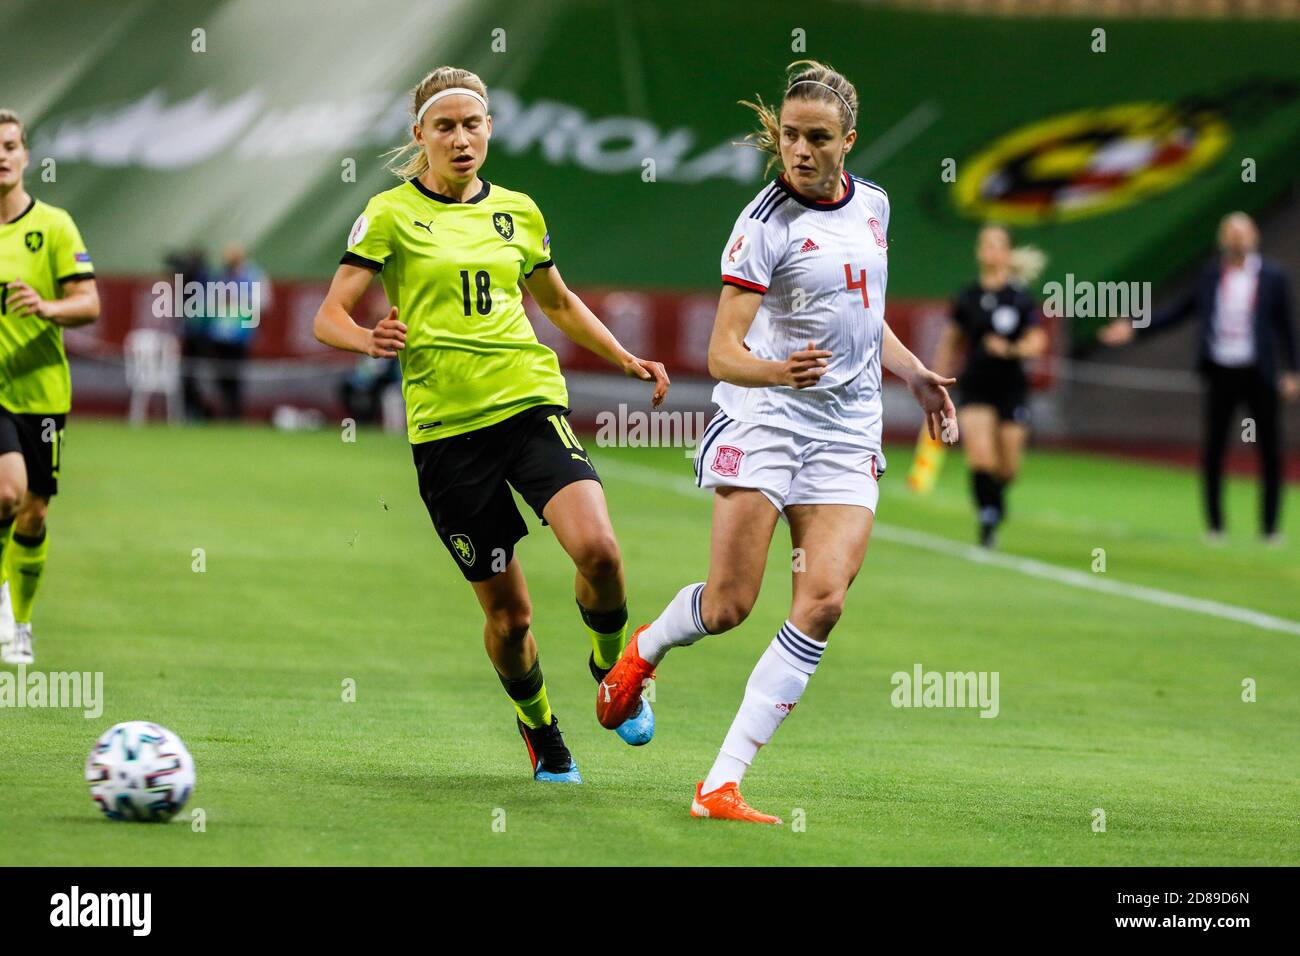 Paredes of Spain and Kamila Dubcova of Czech Republic during the UEFA Women's Euro 2022, qualifying football match between Spain and Czech Republic  C Stock Photo